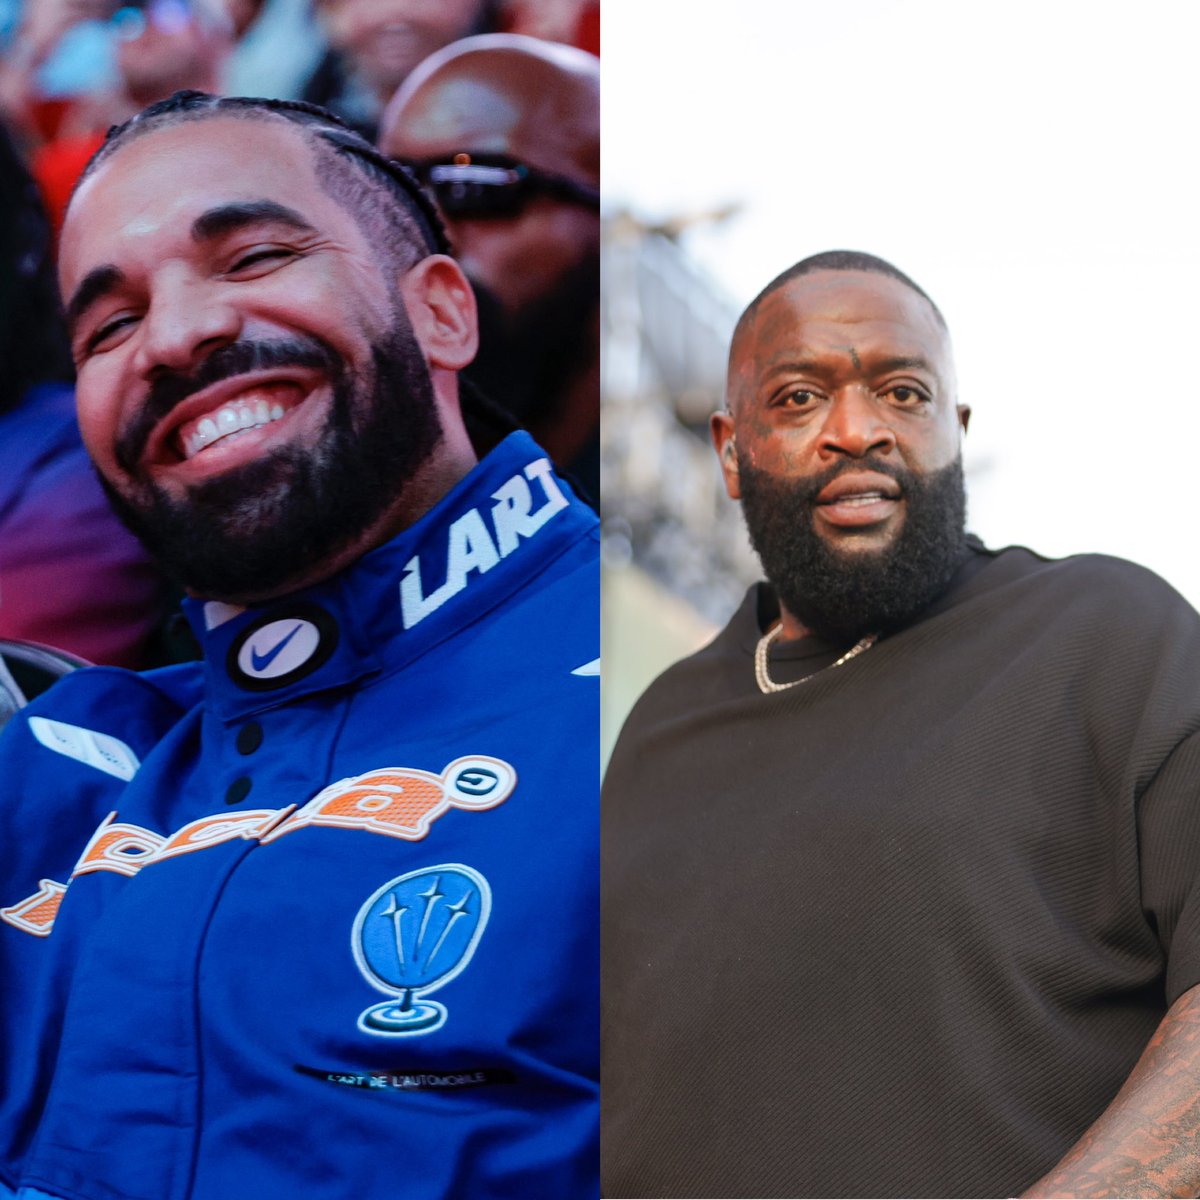 Drake posts DM’s going in on Rick Ross. 'Look how I talk to this turkey 😂 you shoulda just asked for another feature'